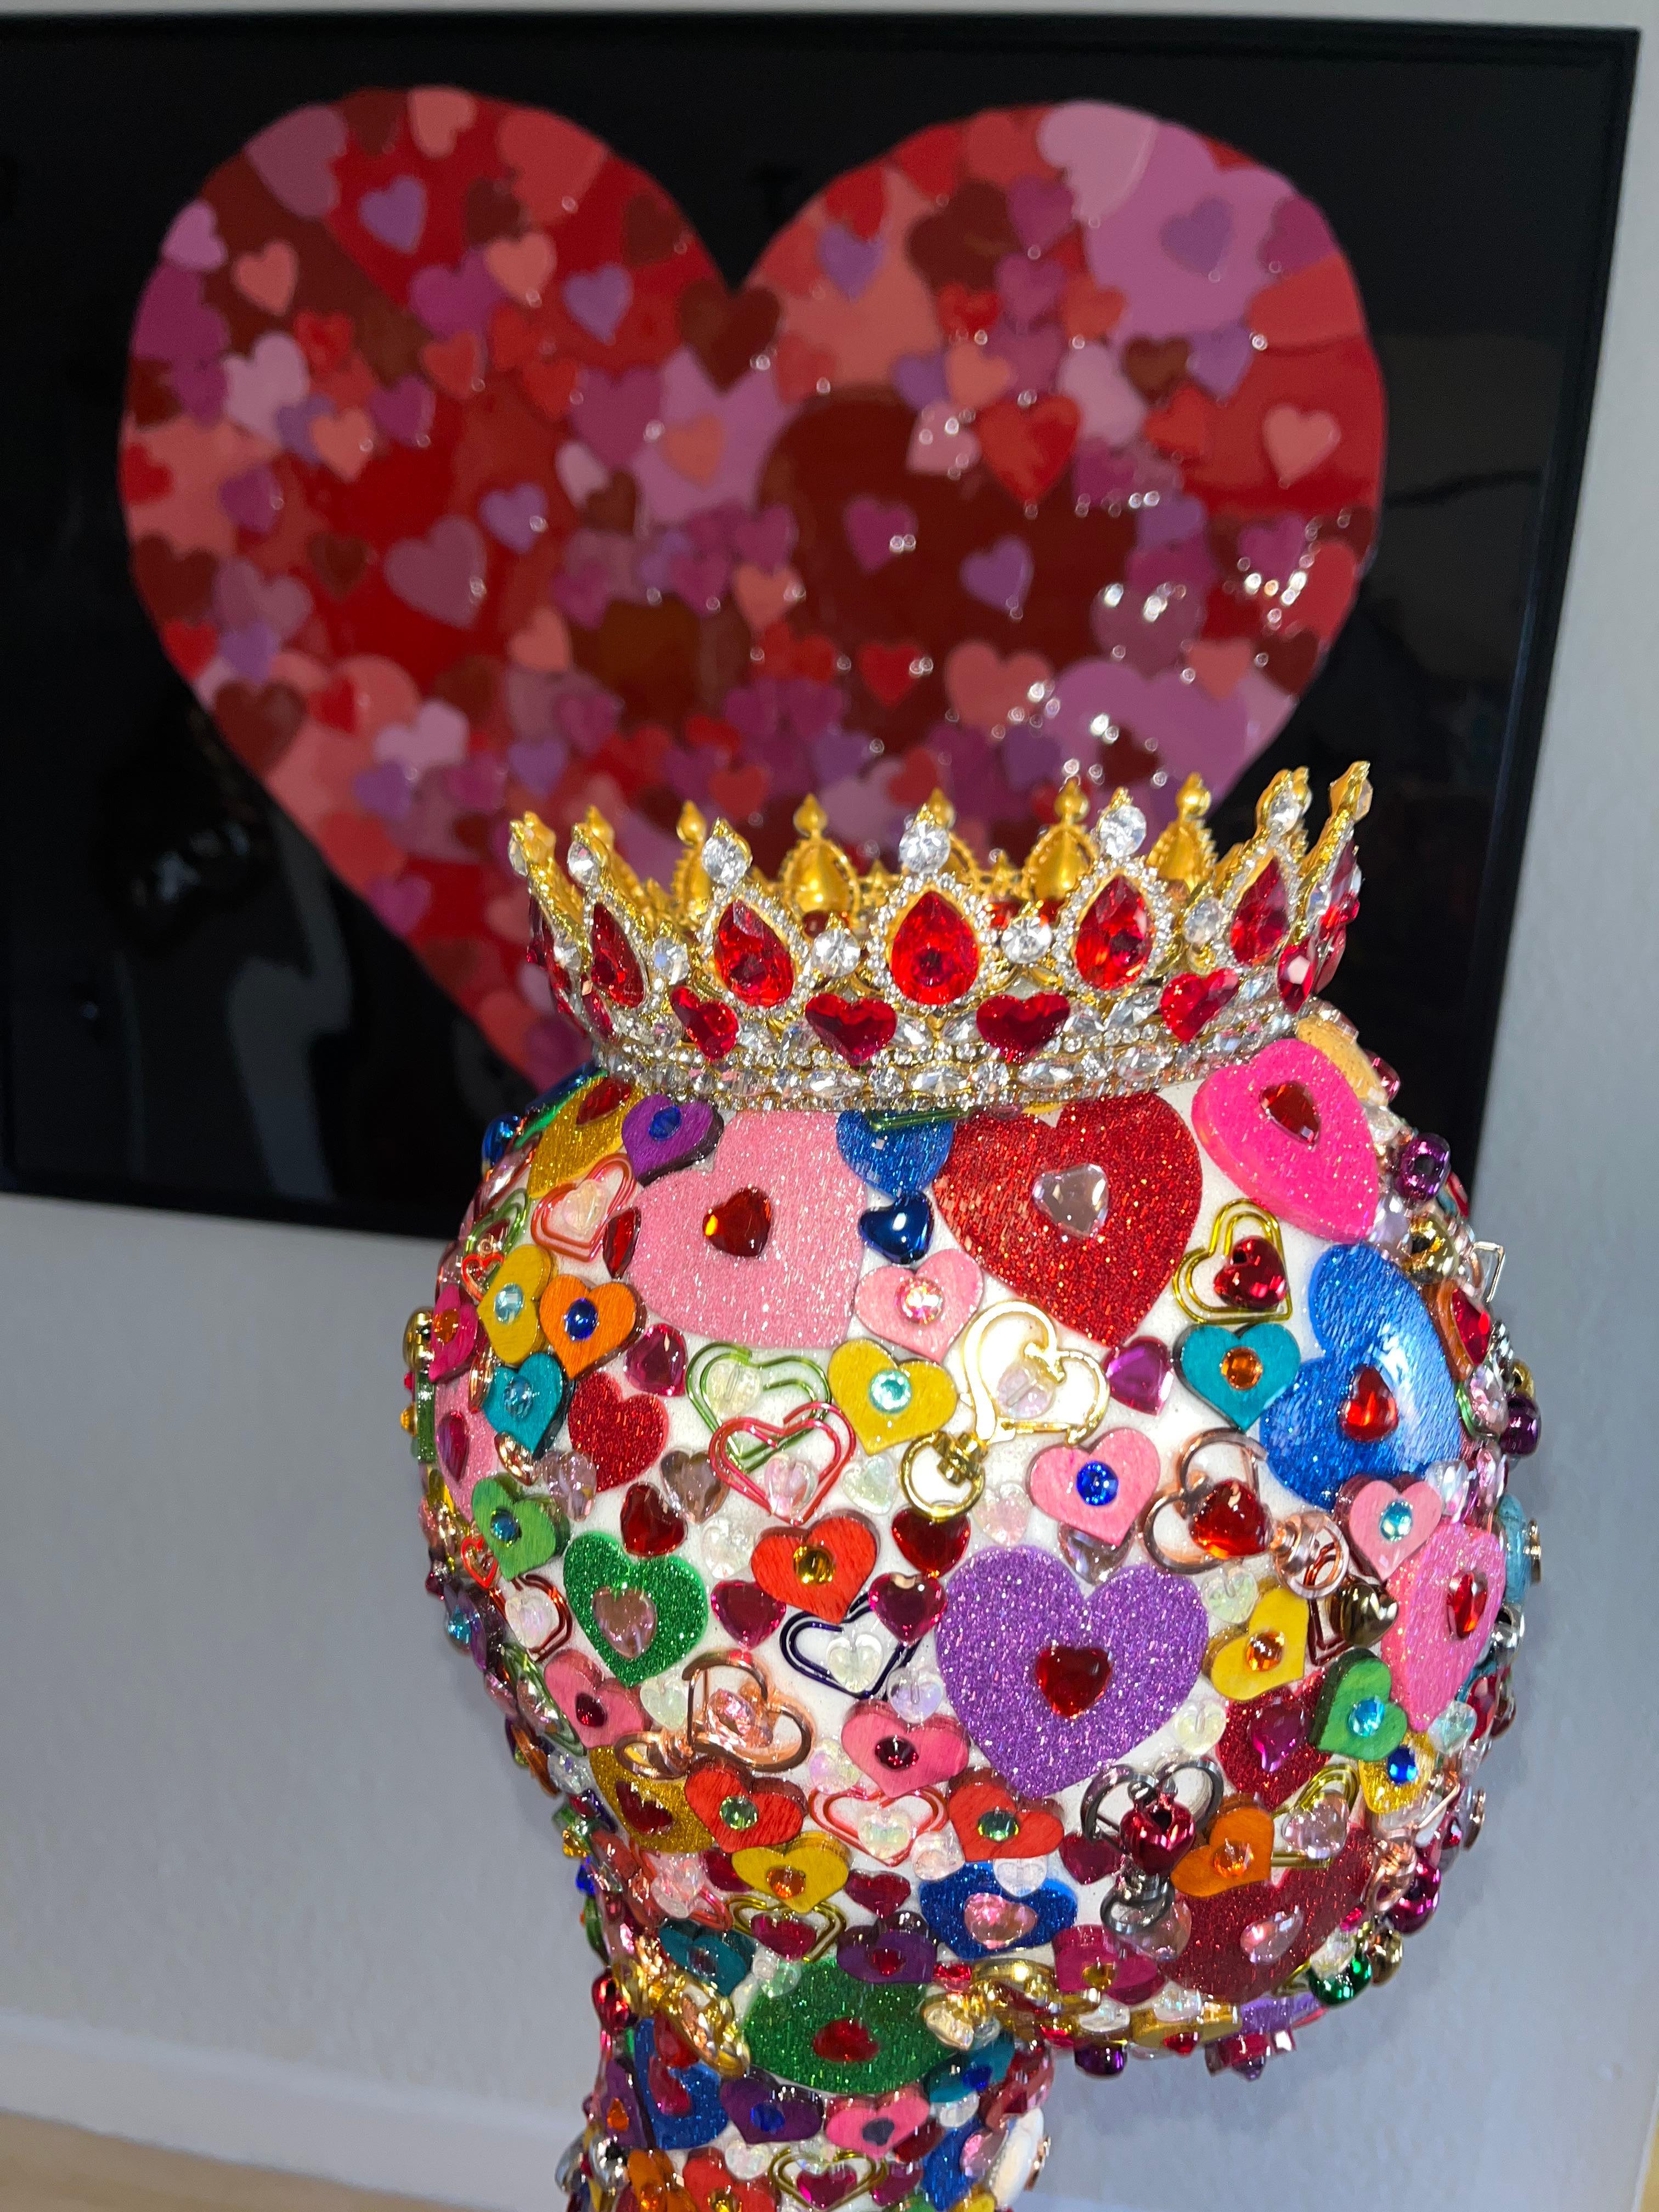 QUEEN OF HEARTS (Original and One of A Kind Mixed Media Sculpture) 7